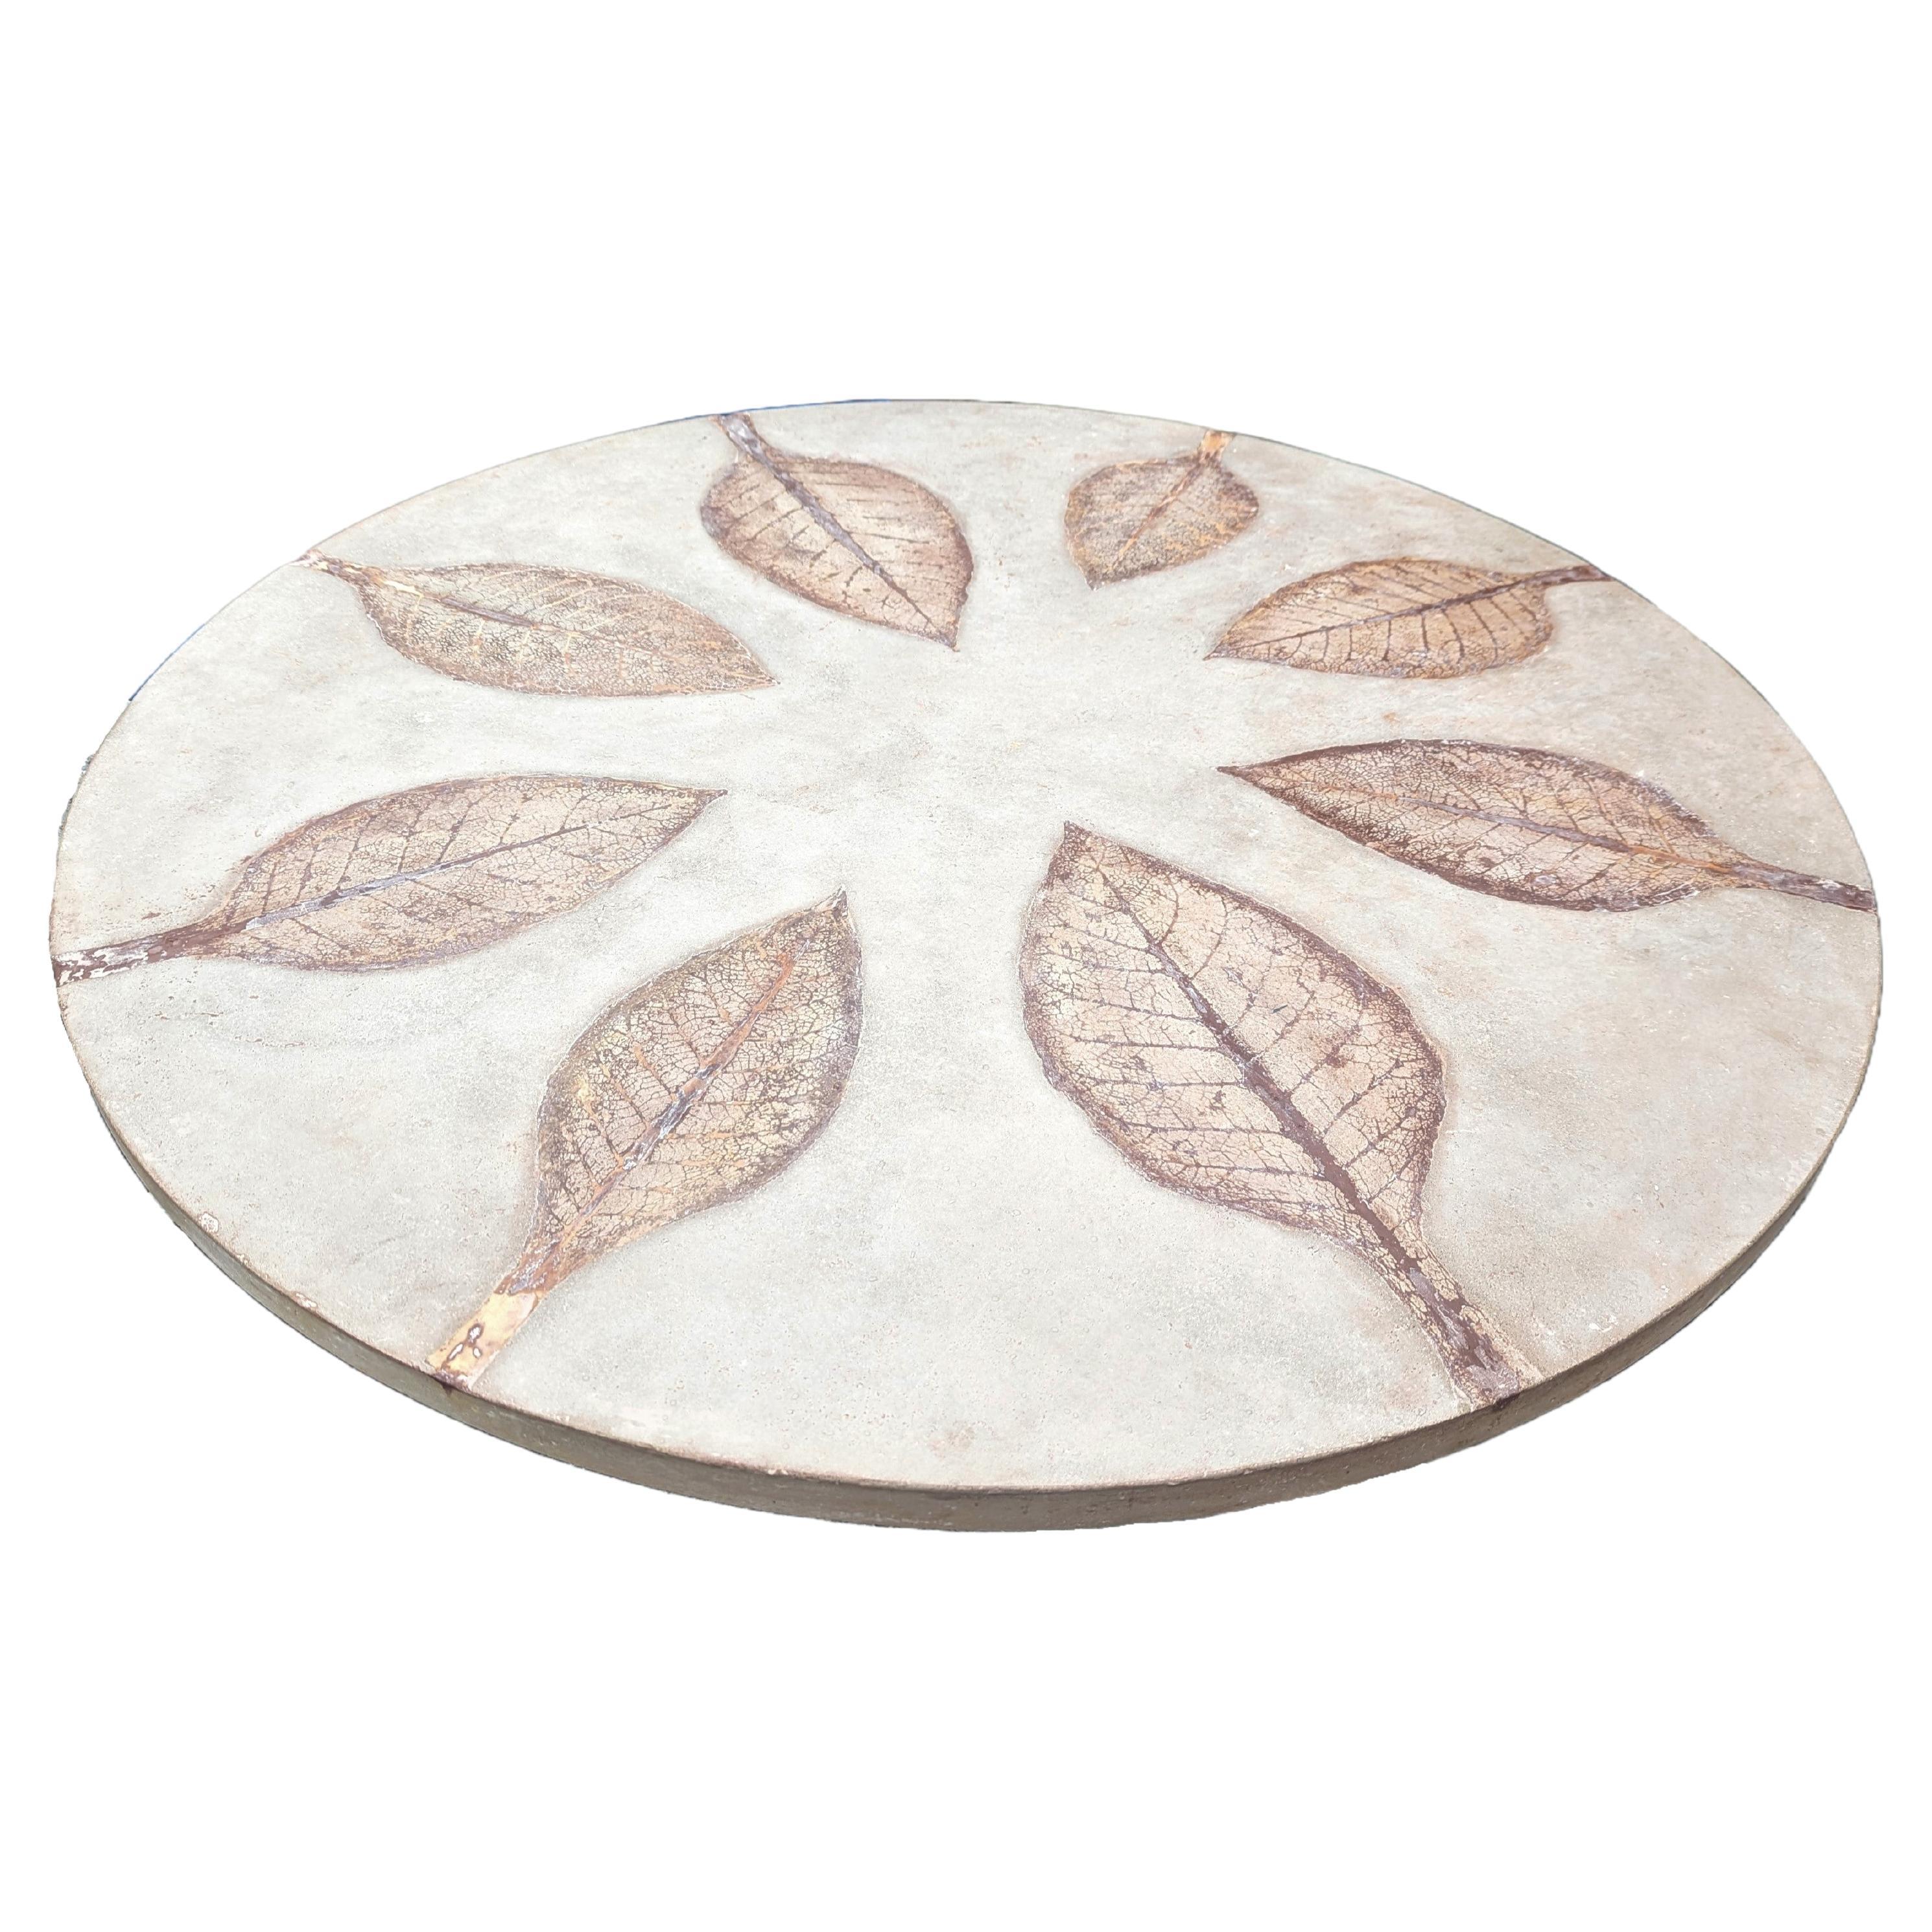 Customizable Concrete Dining or Coffee Table Tops with Botanical Designs